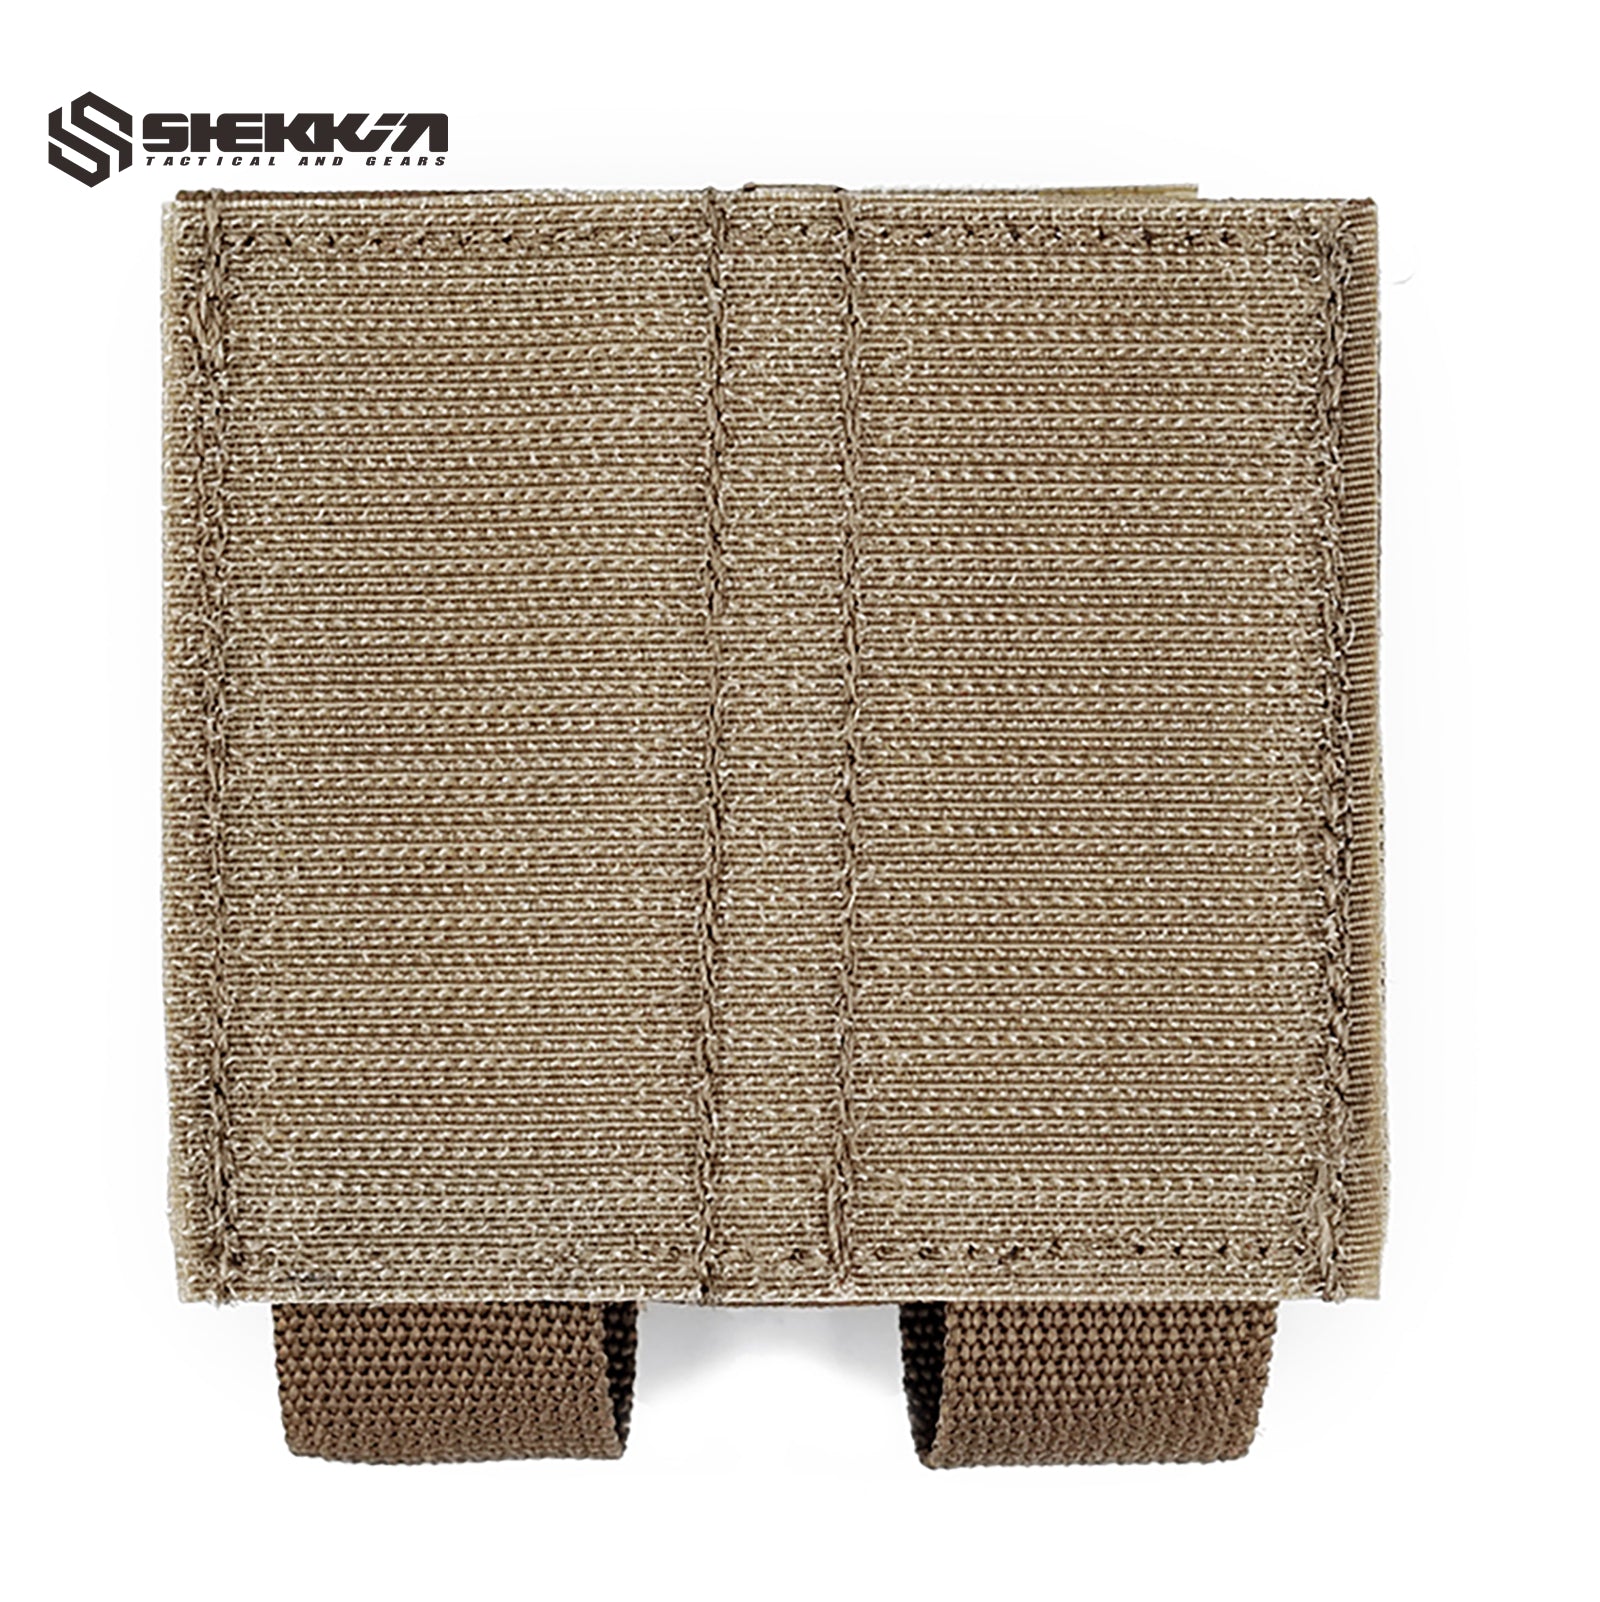 Double 9mm mag pouch for Kangaroo flap - Shekkin Gears